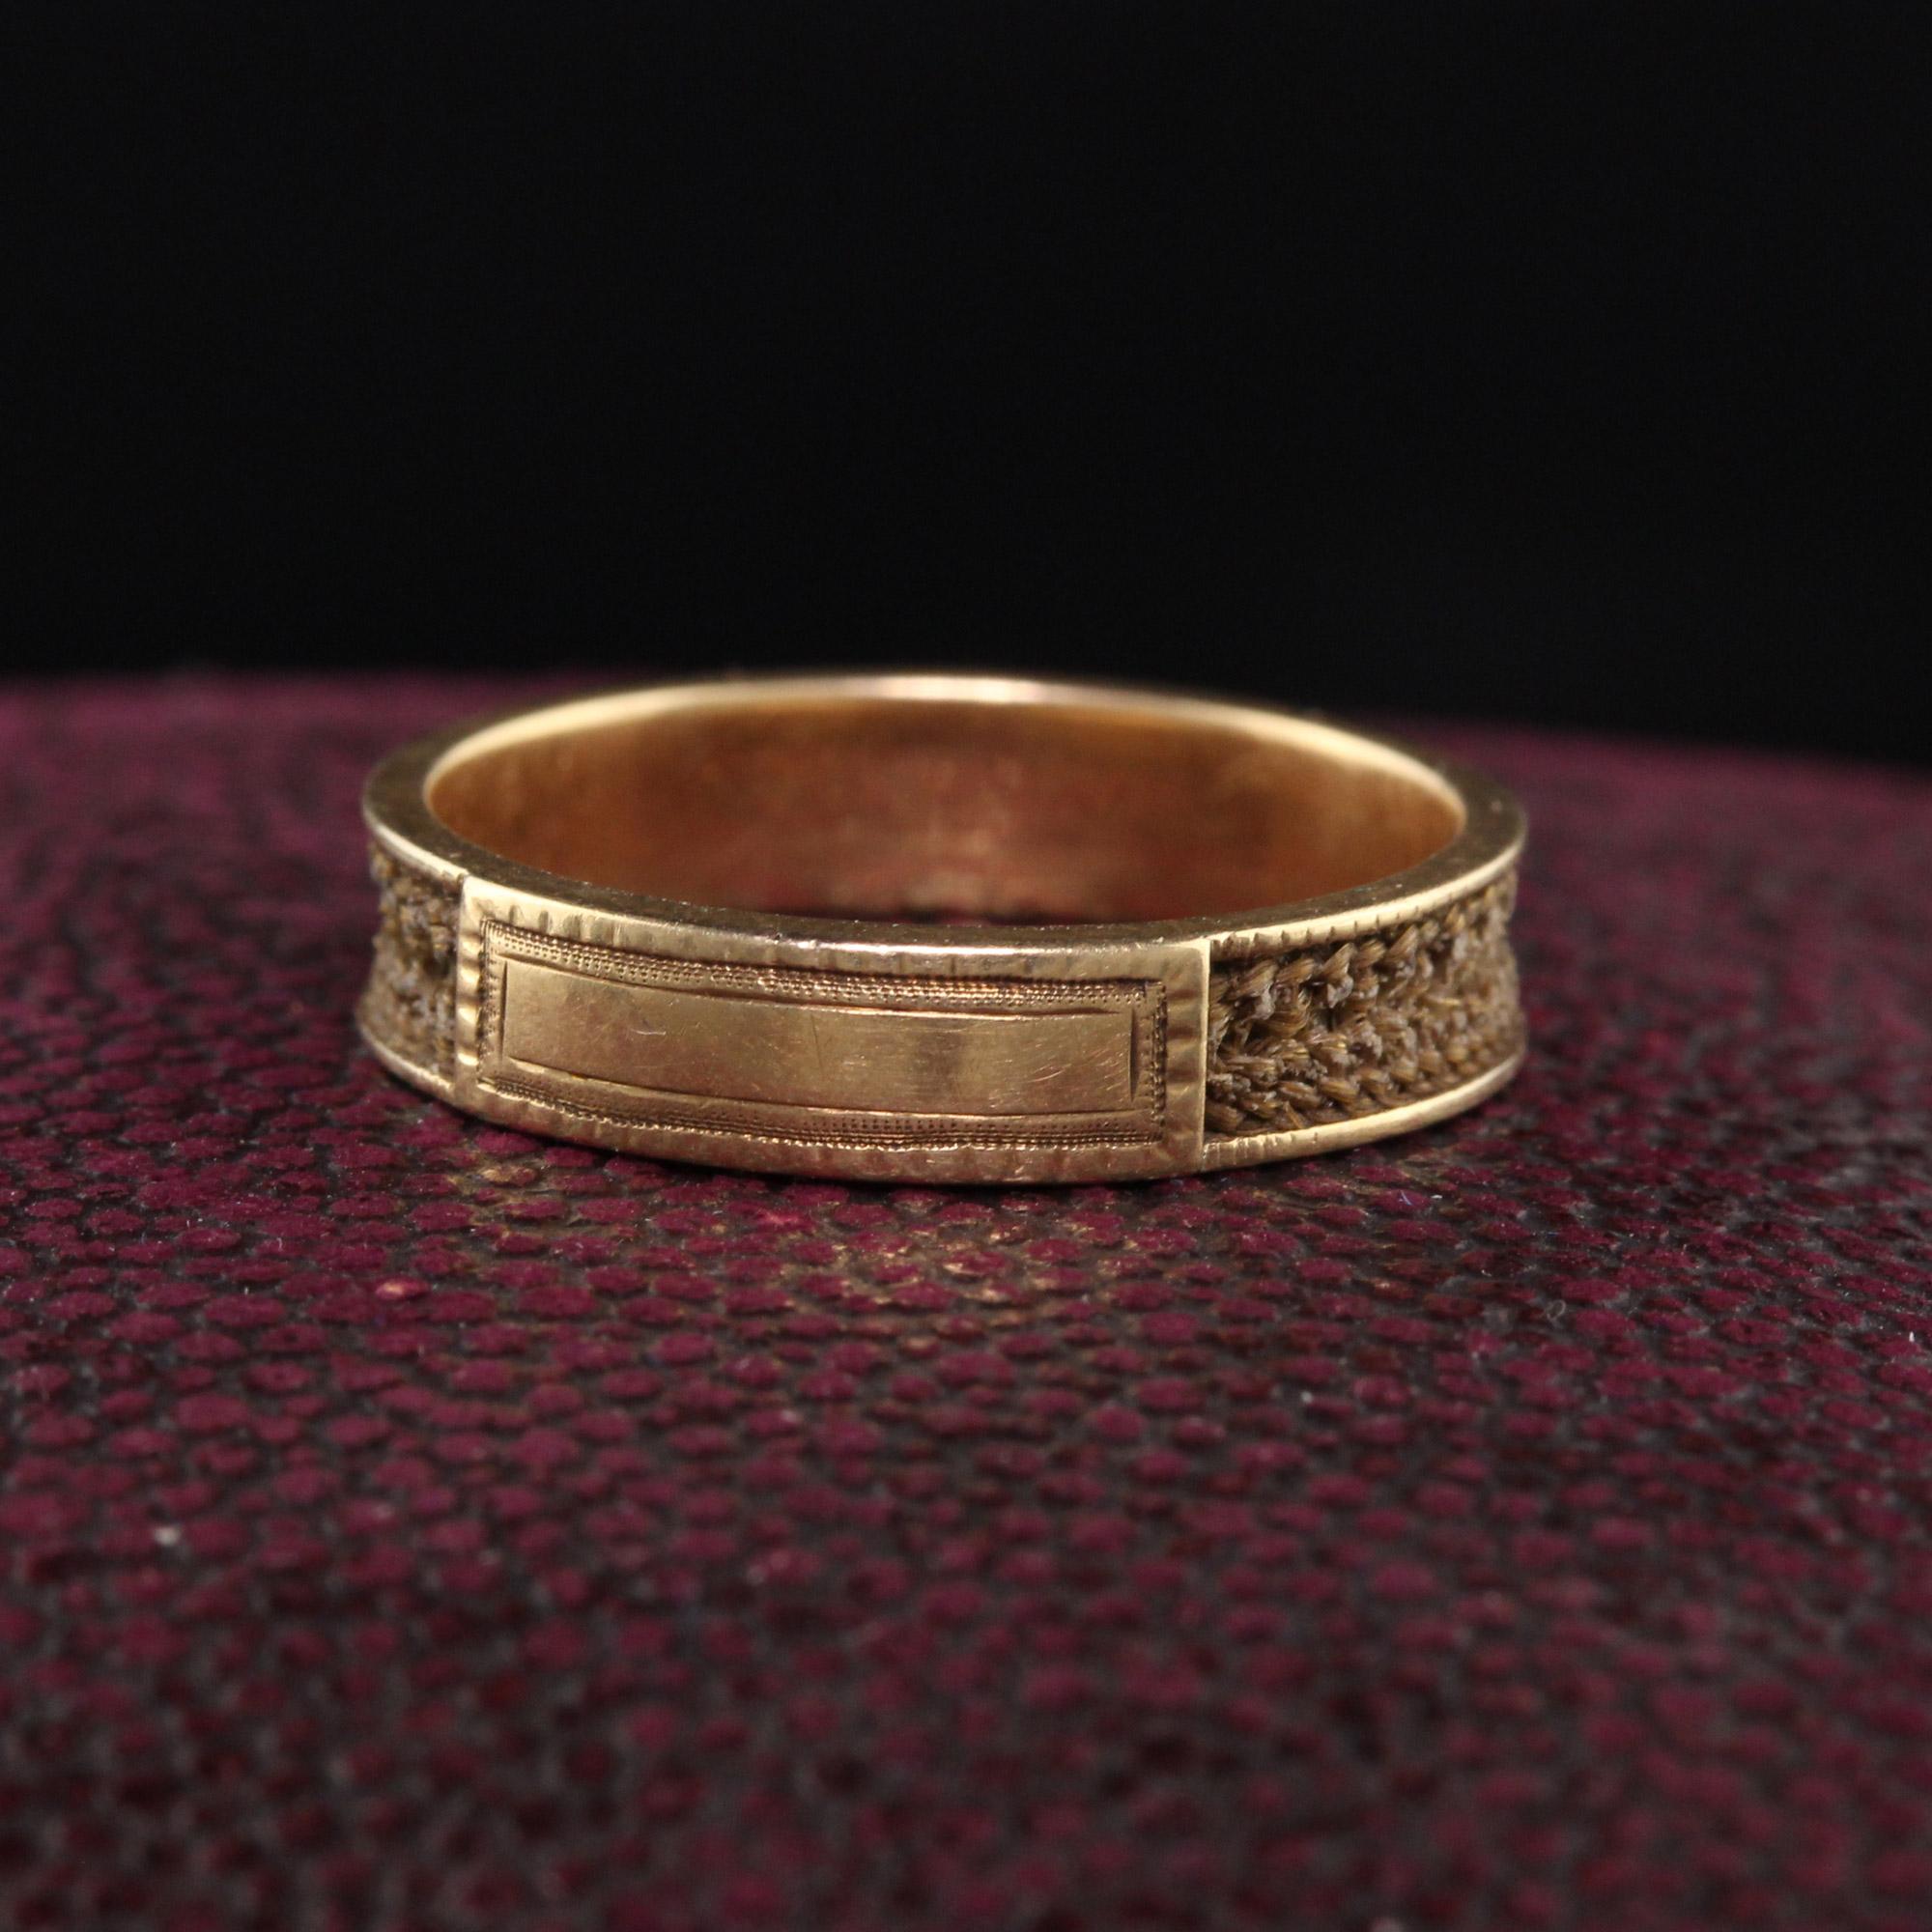 Beautiful Antique Victorian 14K Yellow Gold Mourning Hair Band Ring. This amazing mourning ring still has the hair intact and is not engraved with any initials! It is very rare to come across non initialed rings of this age.

Item #R0966

Metal: 14K